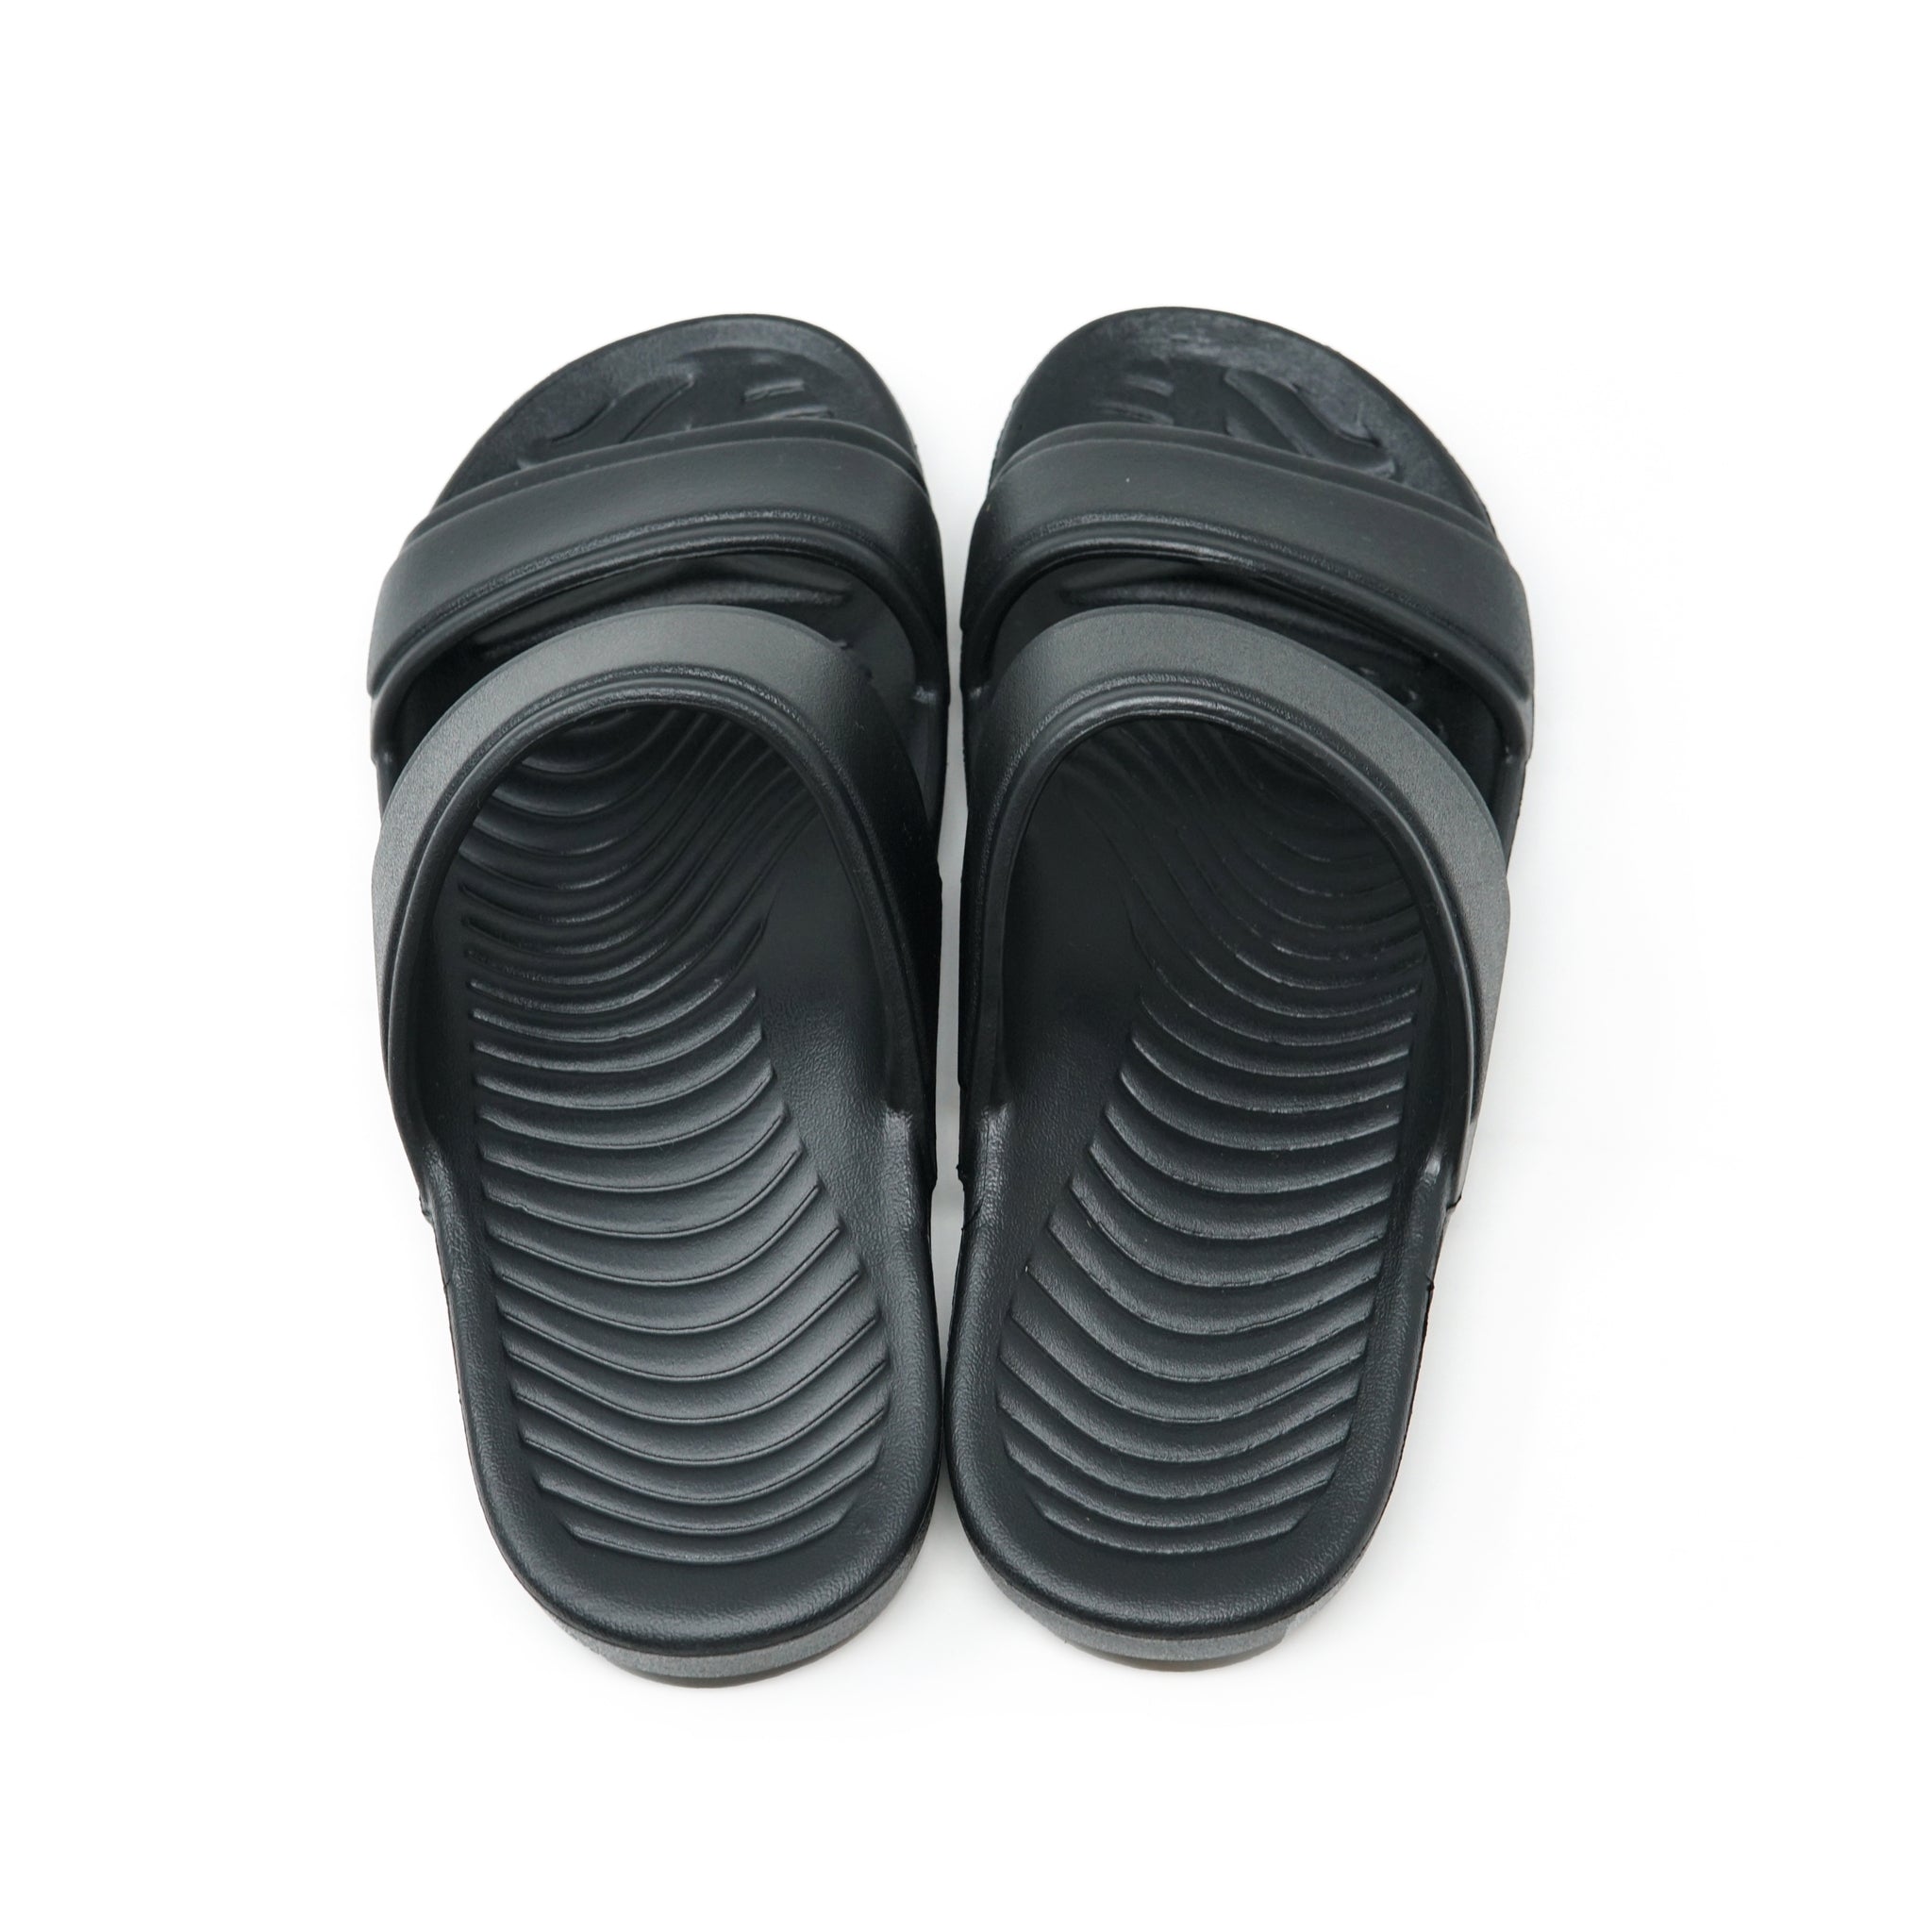 Name:One Comfortble Two Strap | Color:Black | Size : 8/9/10 |【American mart steppers】